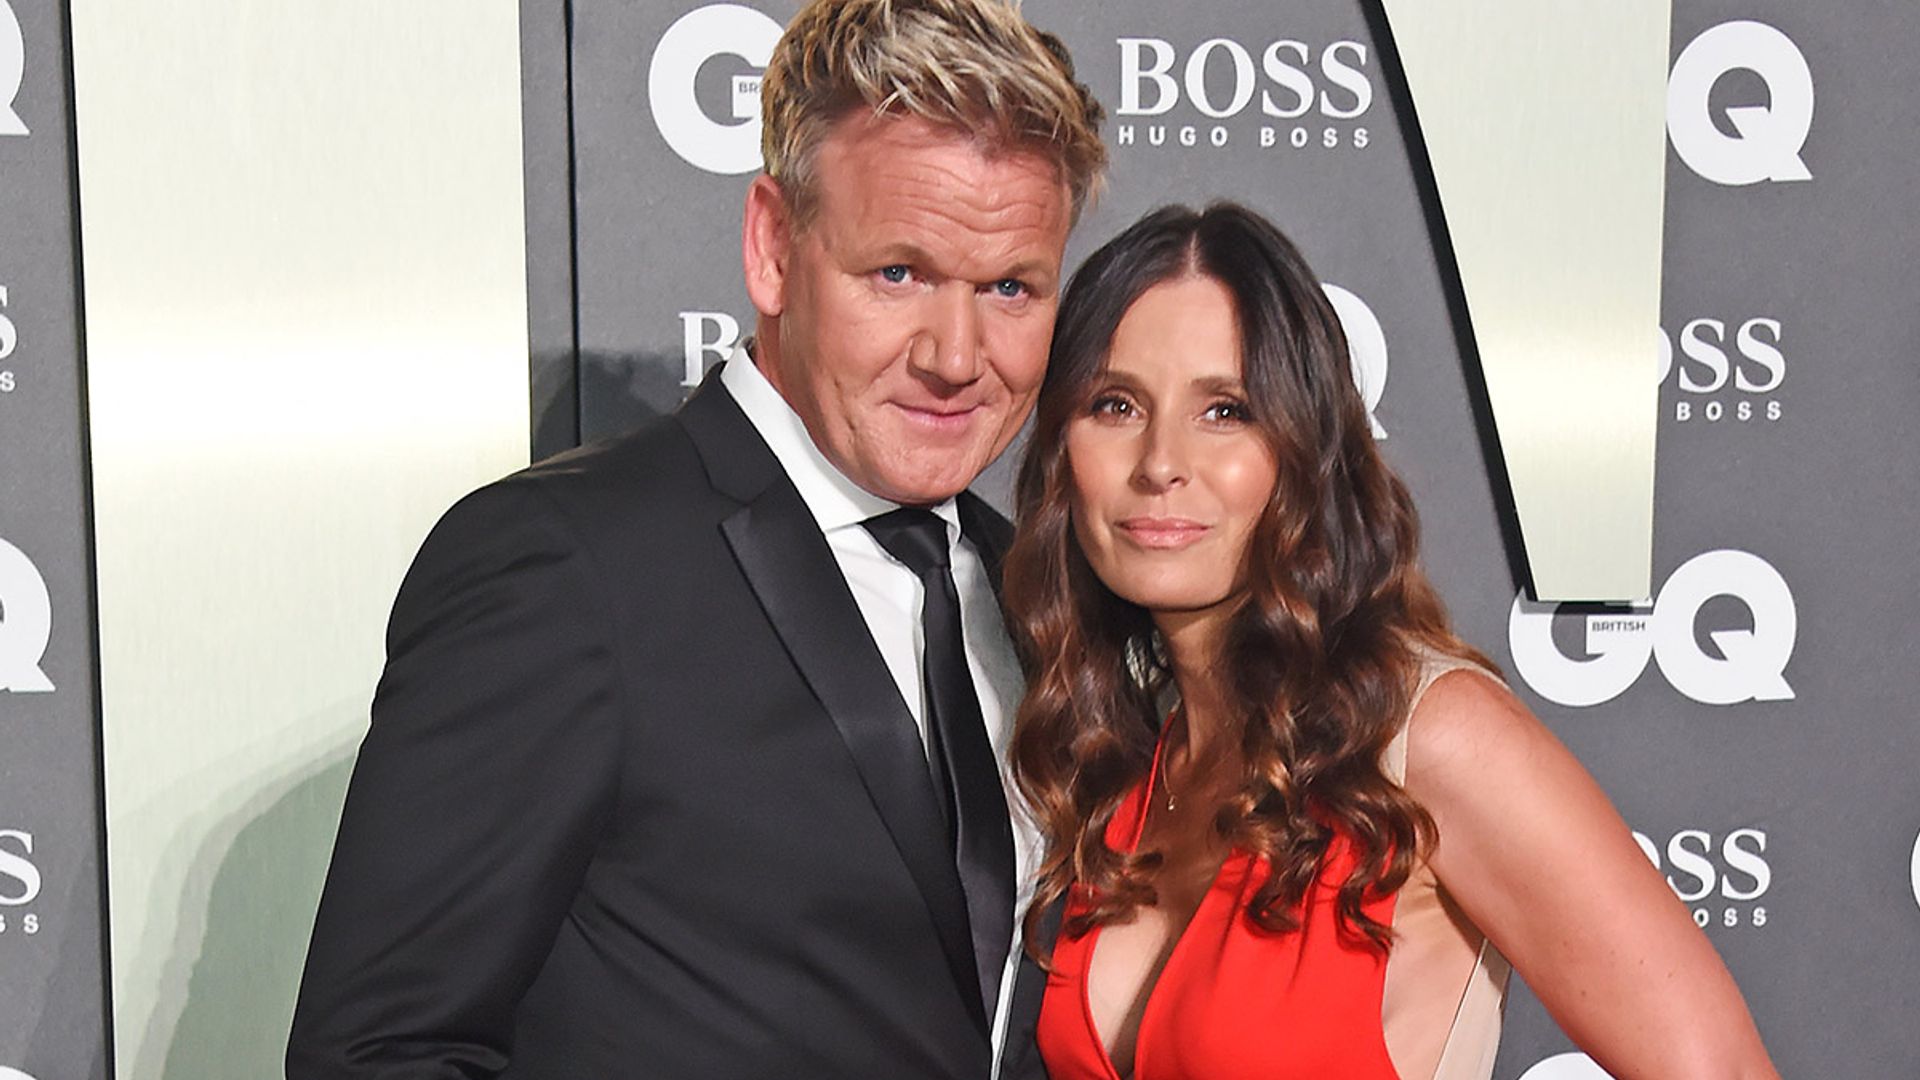 Gordon Ramsay celebrates his twins' 22nd birthday – and the photo is incredible